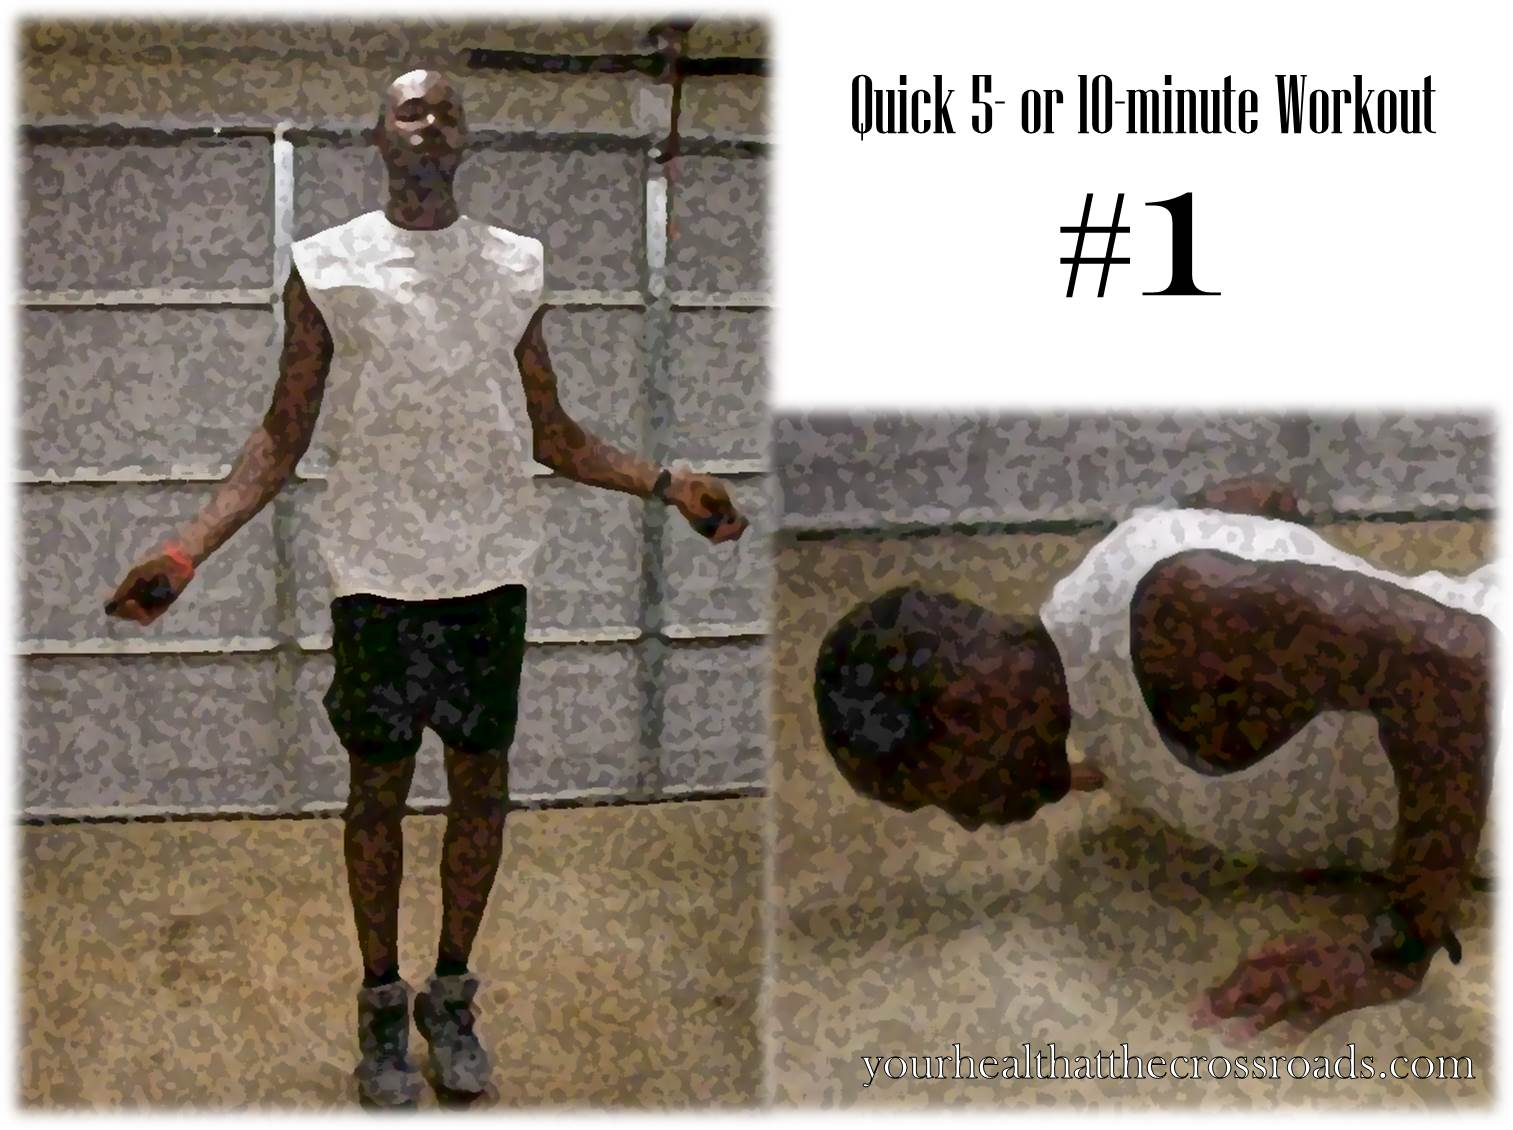 Quick 5 or 10 Minute Workout #1